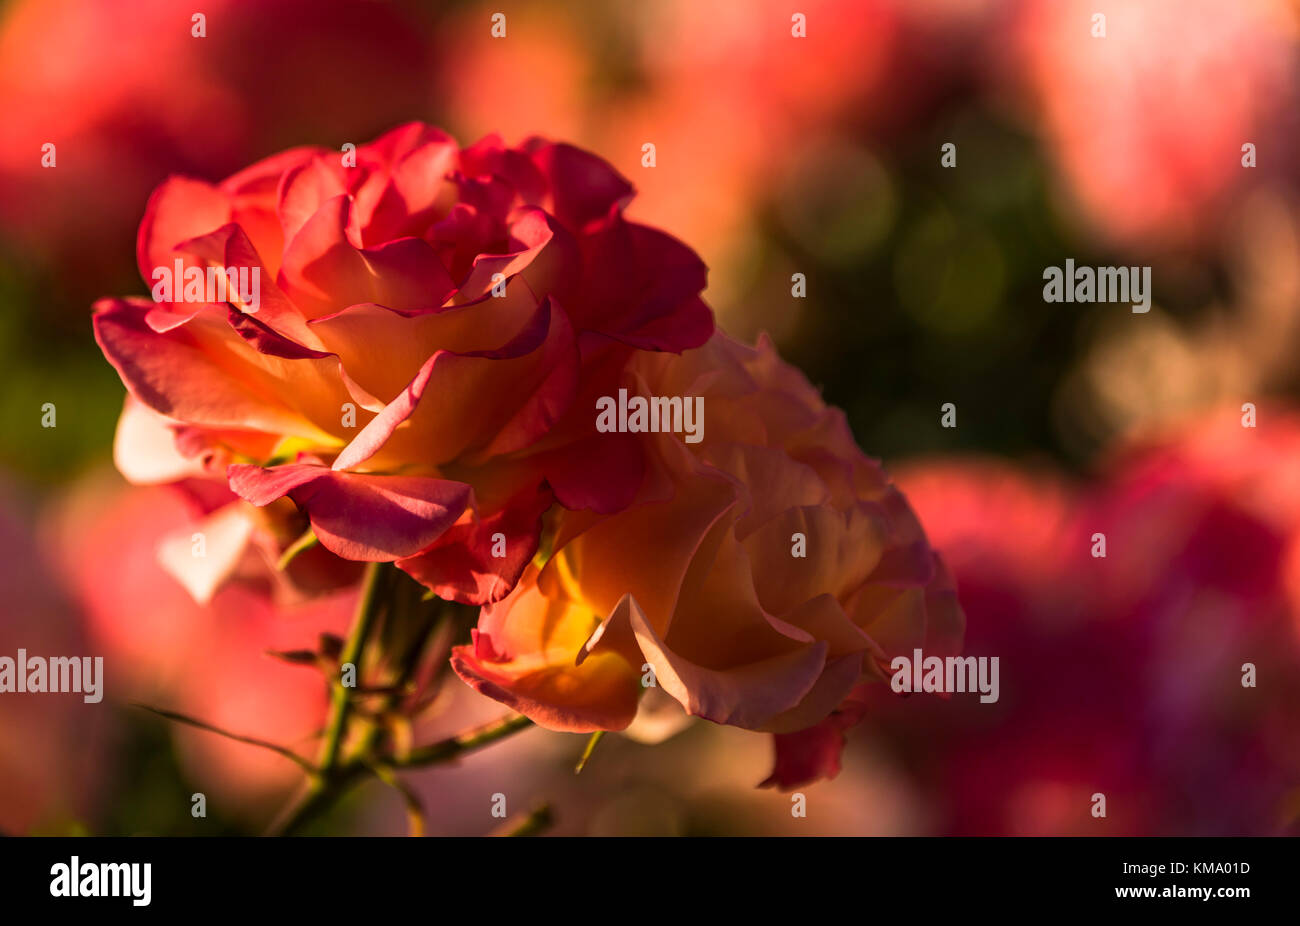 Closeup image of Roses in bloom Stock Photo